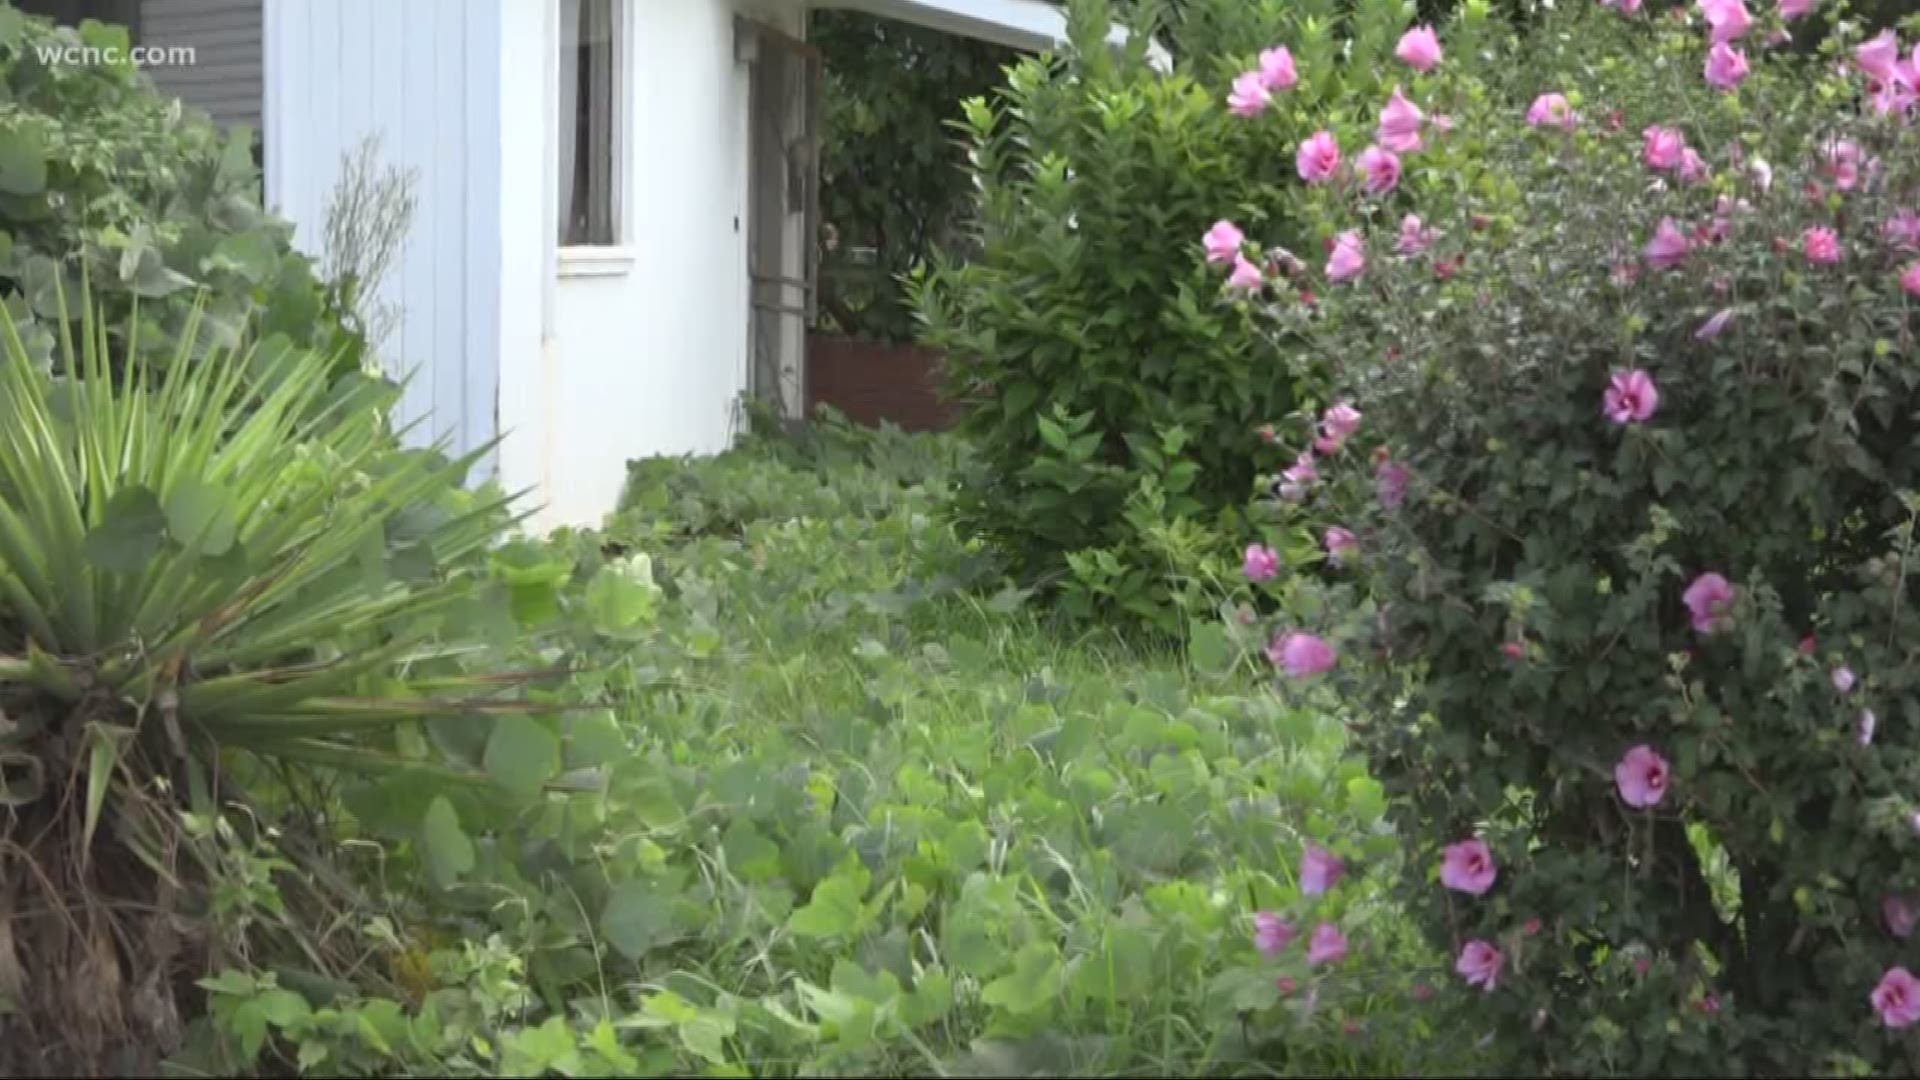 City officials say the property owner was fined and will be billed for the grass cutting.